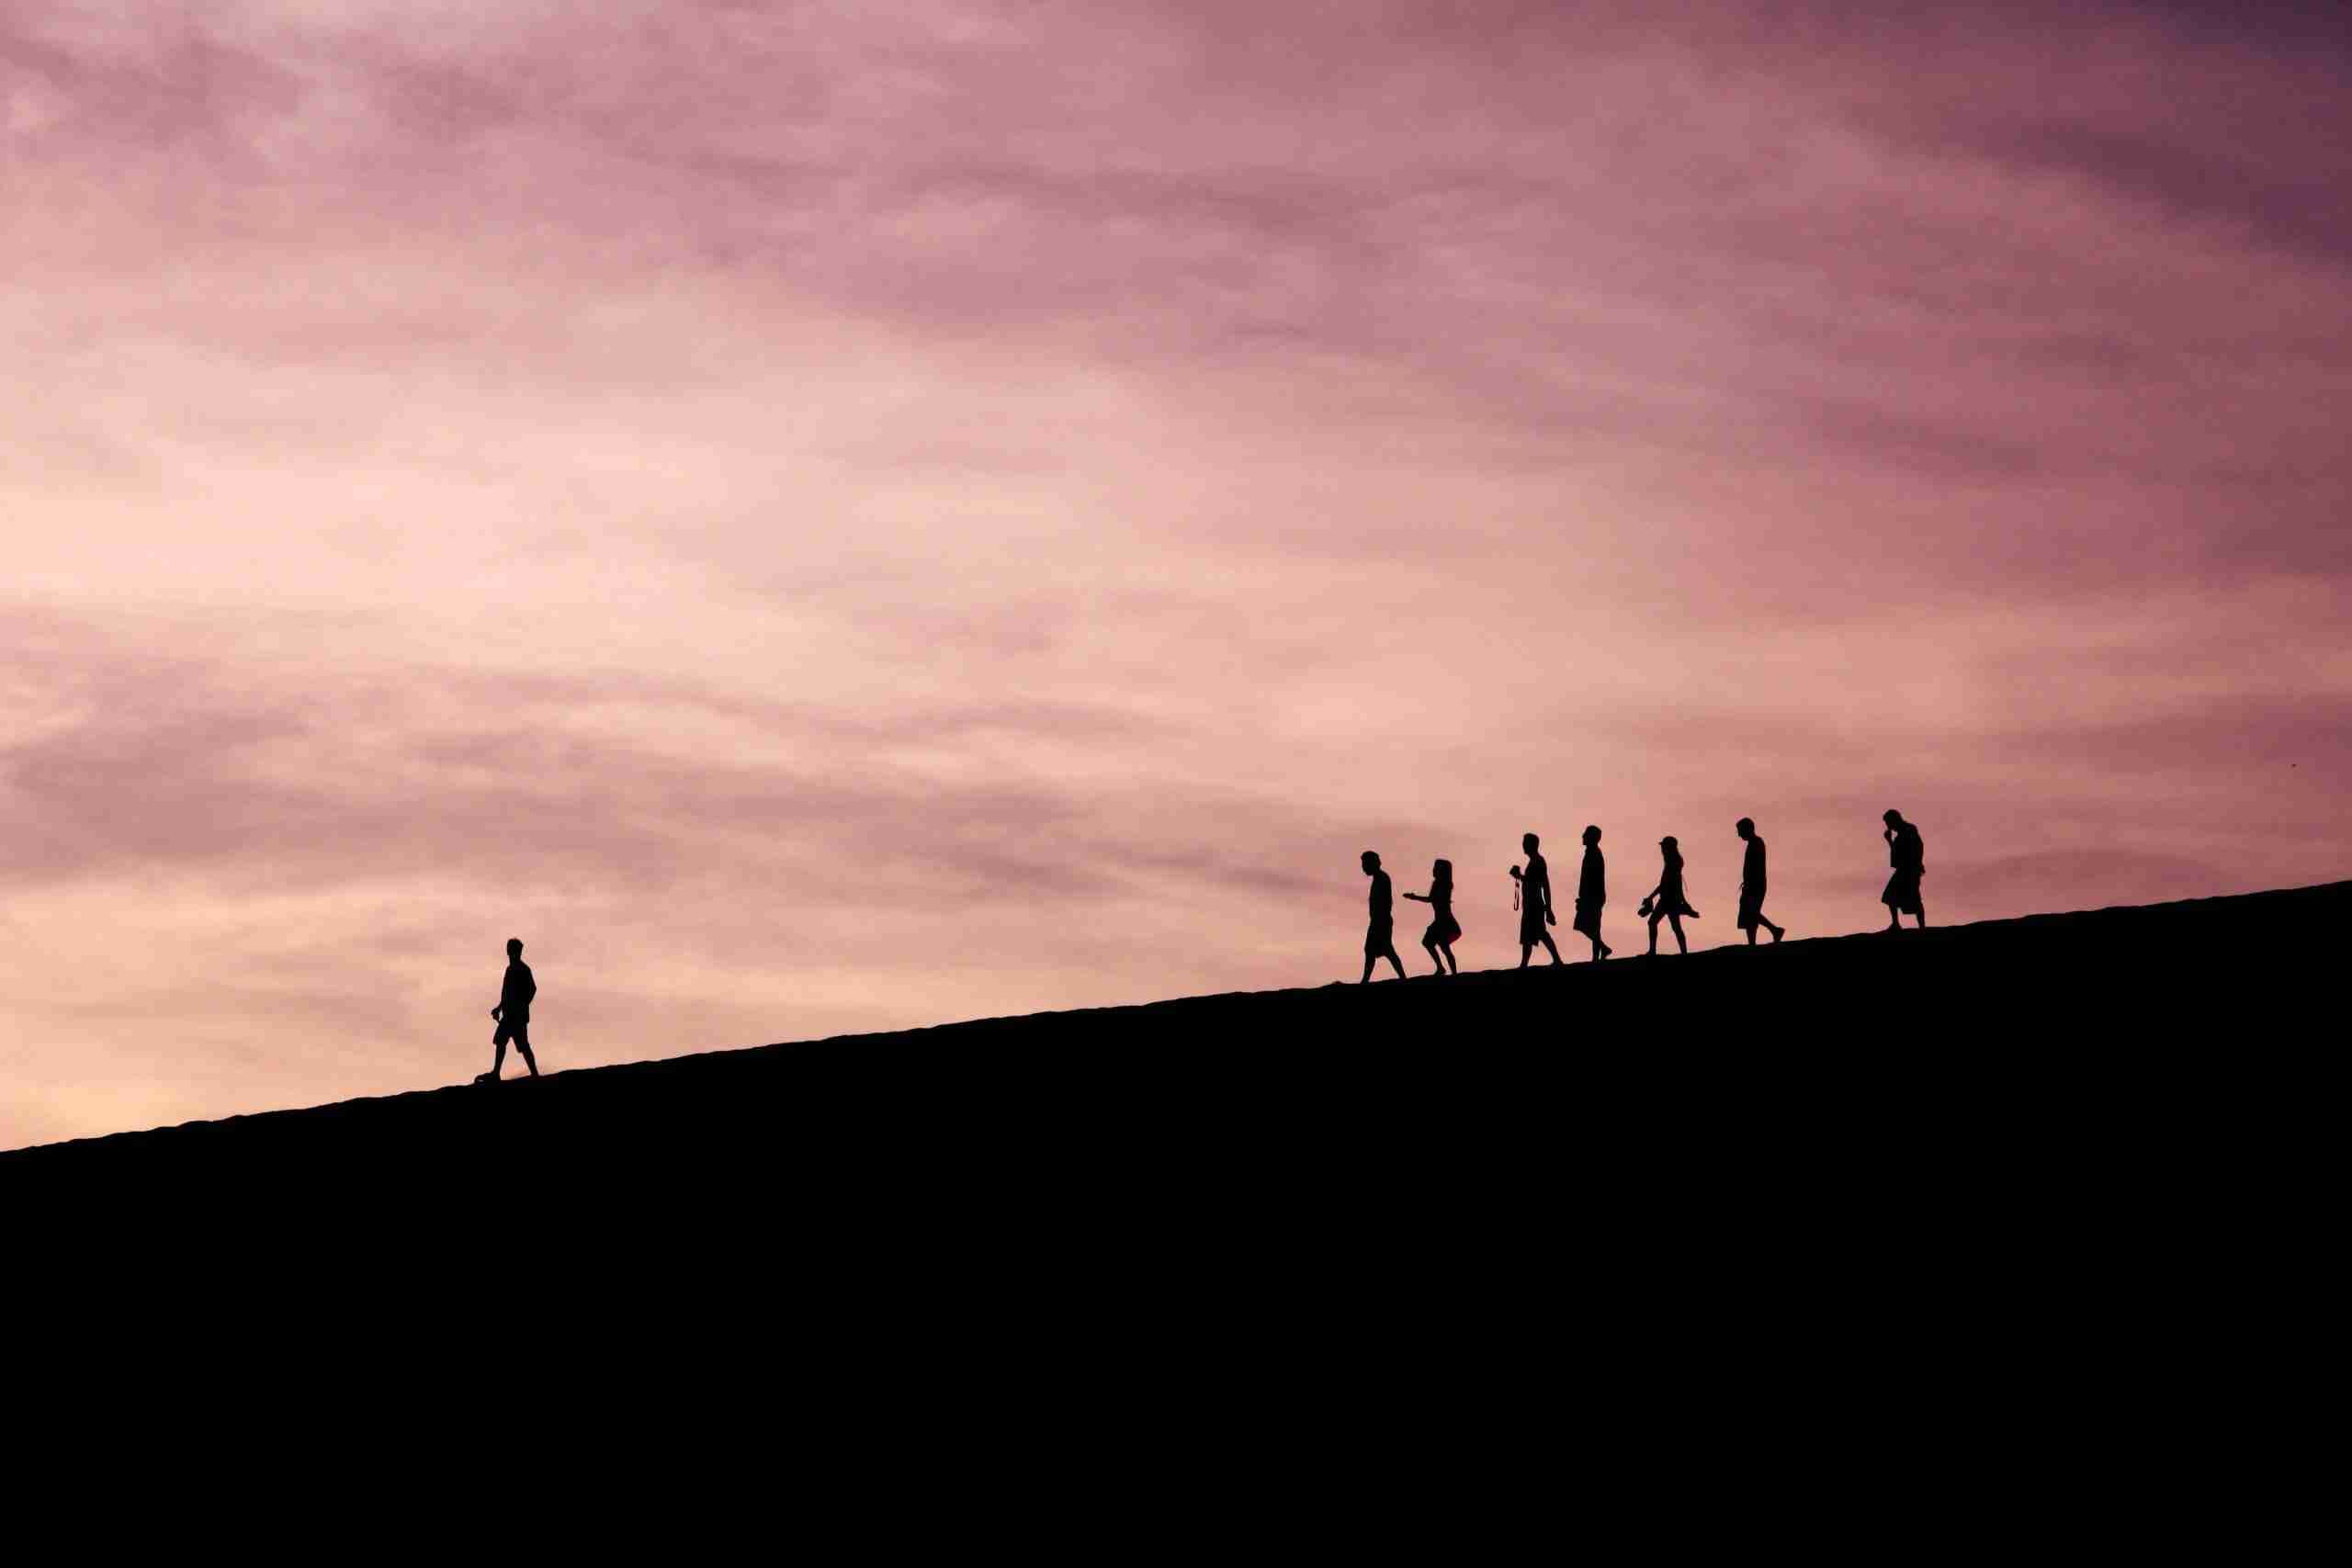 This picture of one person walking in the lead, with a group of people following behind conveys the importance of leadership in both the crafting and implementing of an innovation strategy and culture of innovation